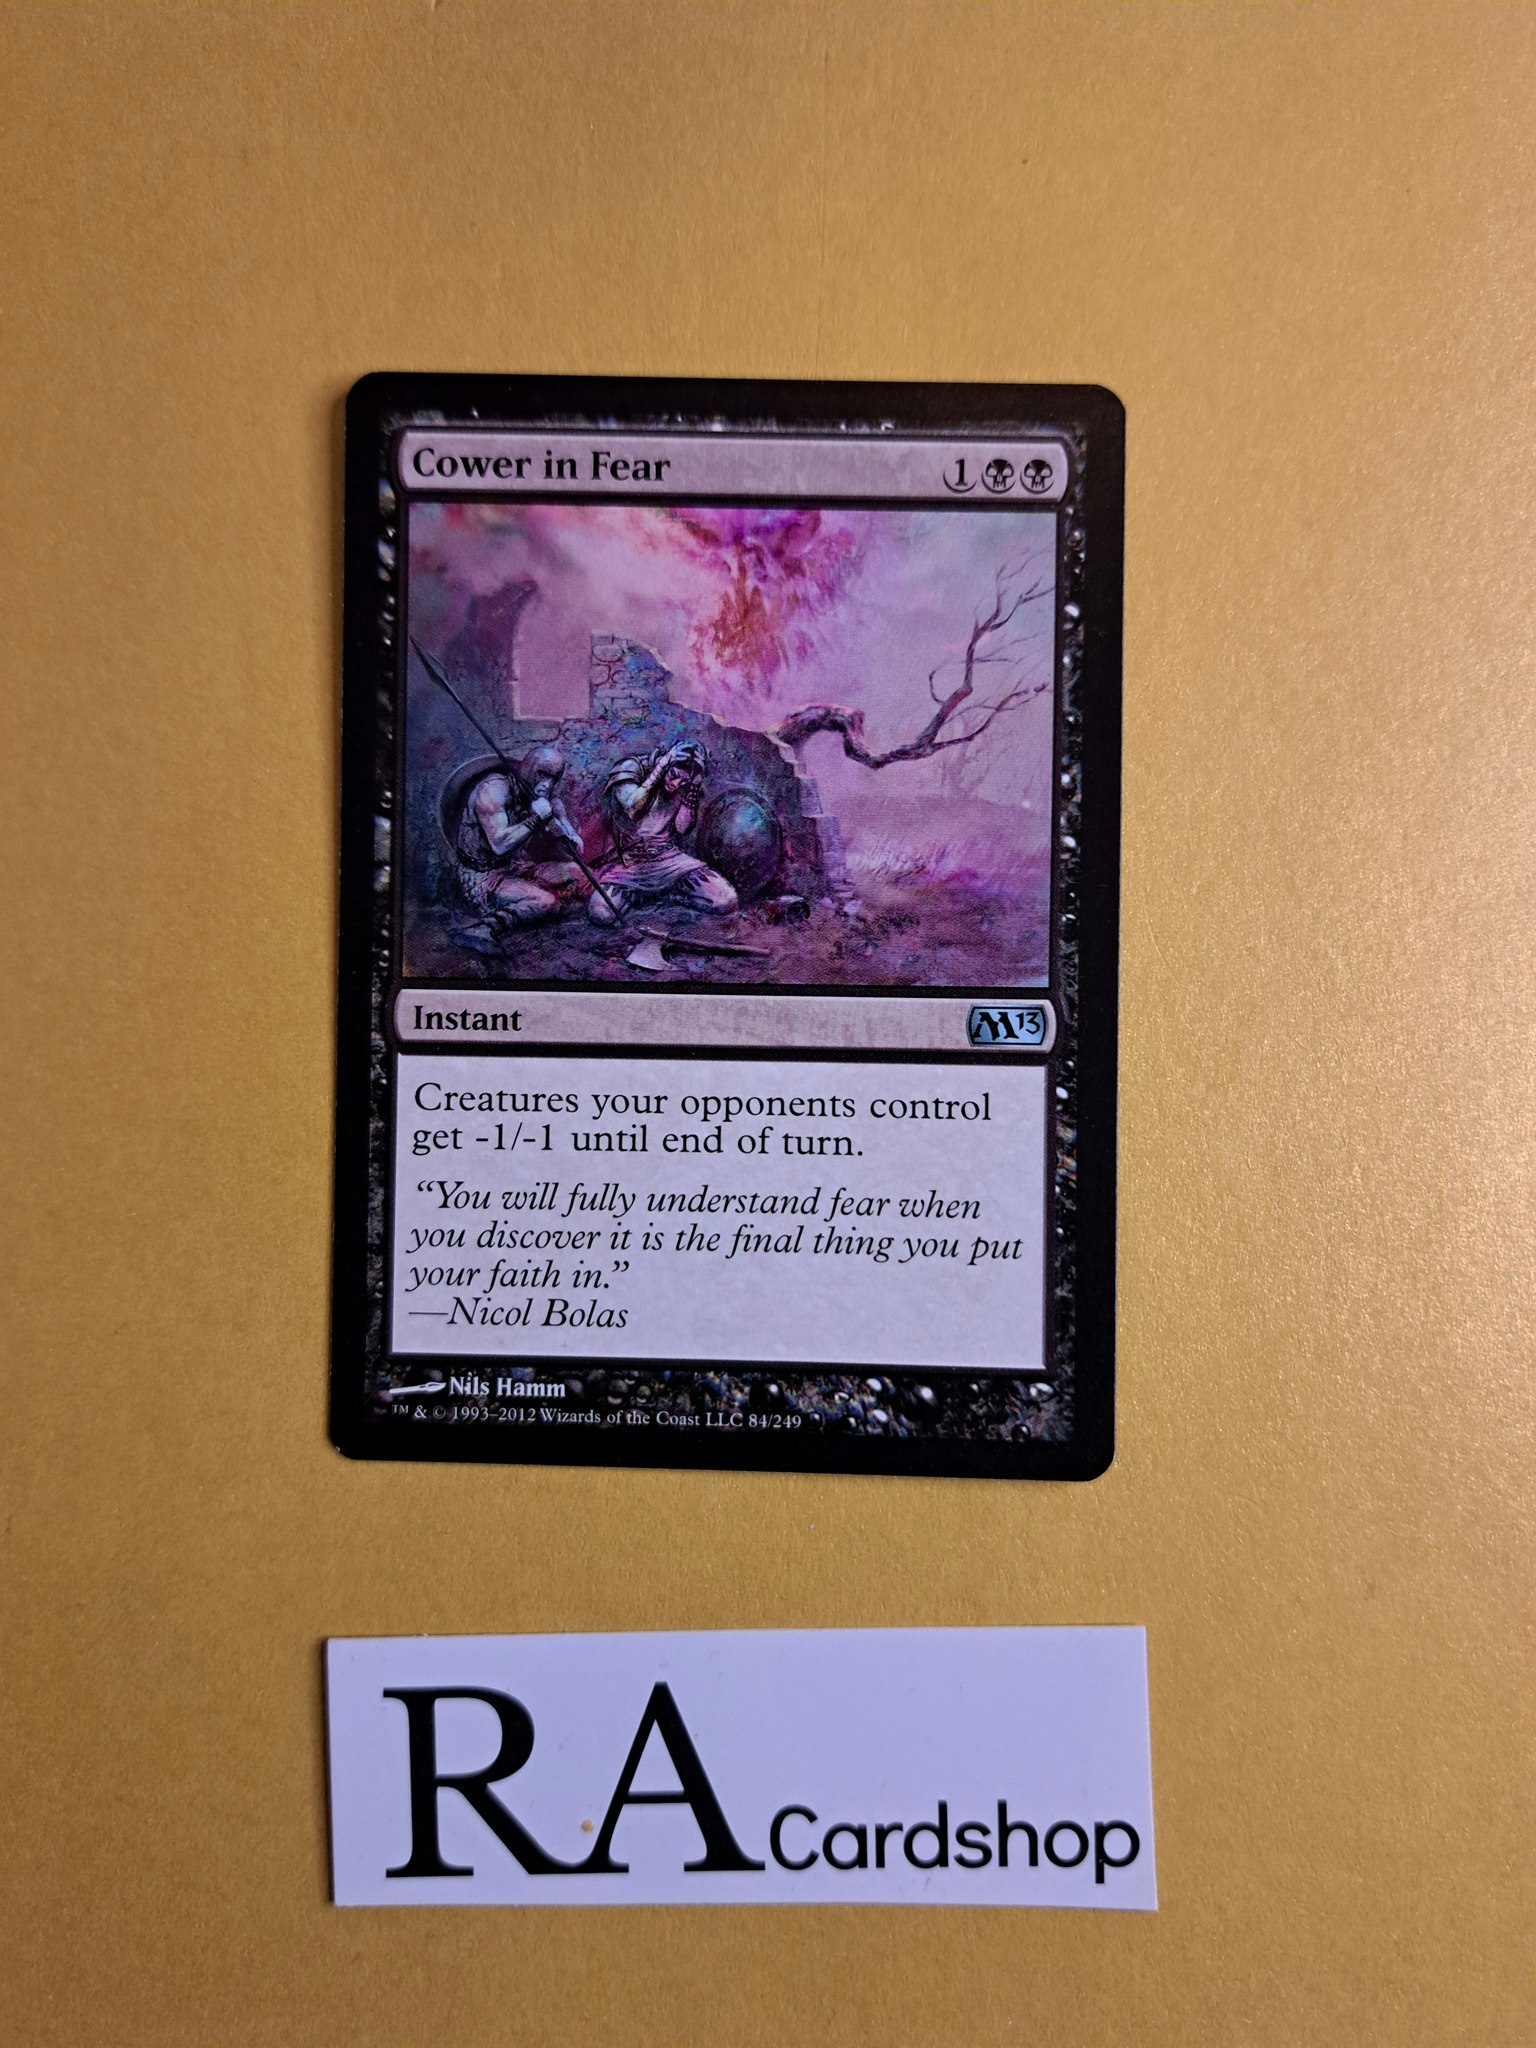 Cower in Fear Uncommon 84/249 Core 2013 (M13) Magic the Gathering